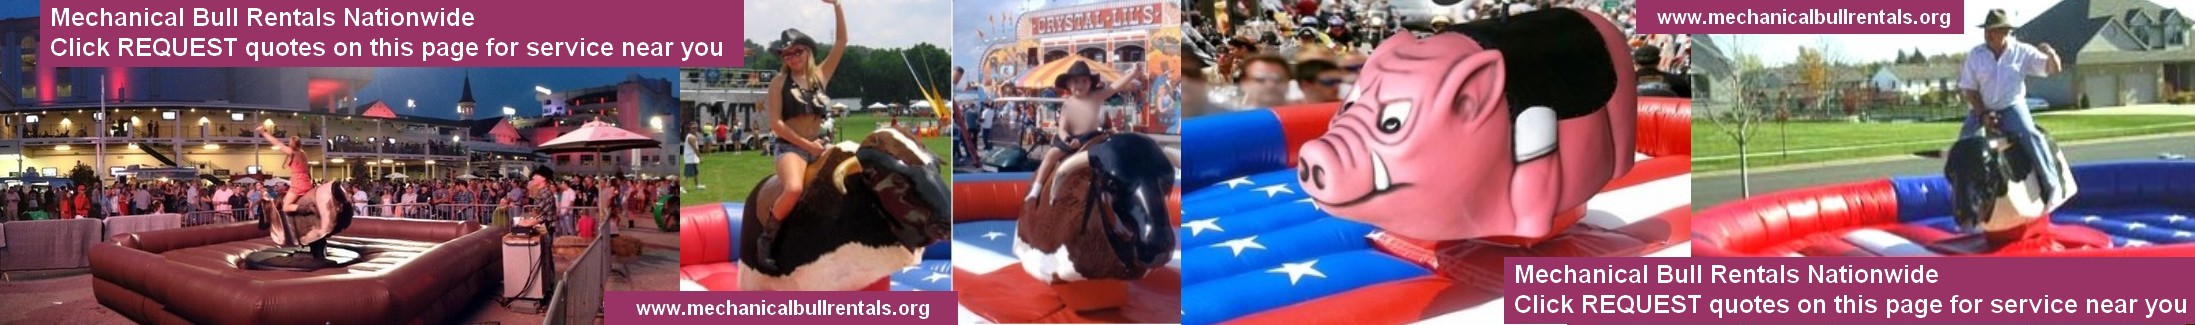 Mechanical Bull Rentals Carteret New Jersey NJ and near you. Free referrals to local mechanical bull companies LOGO